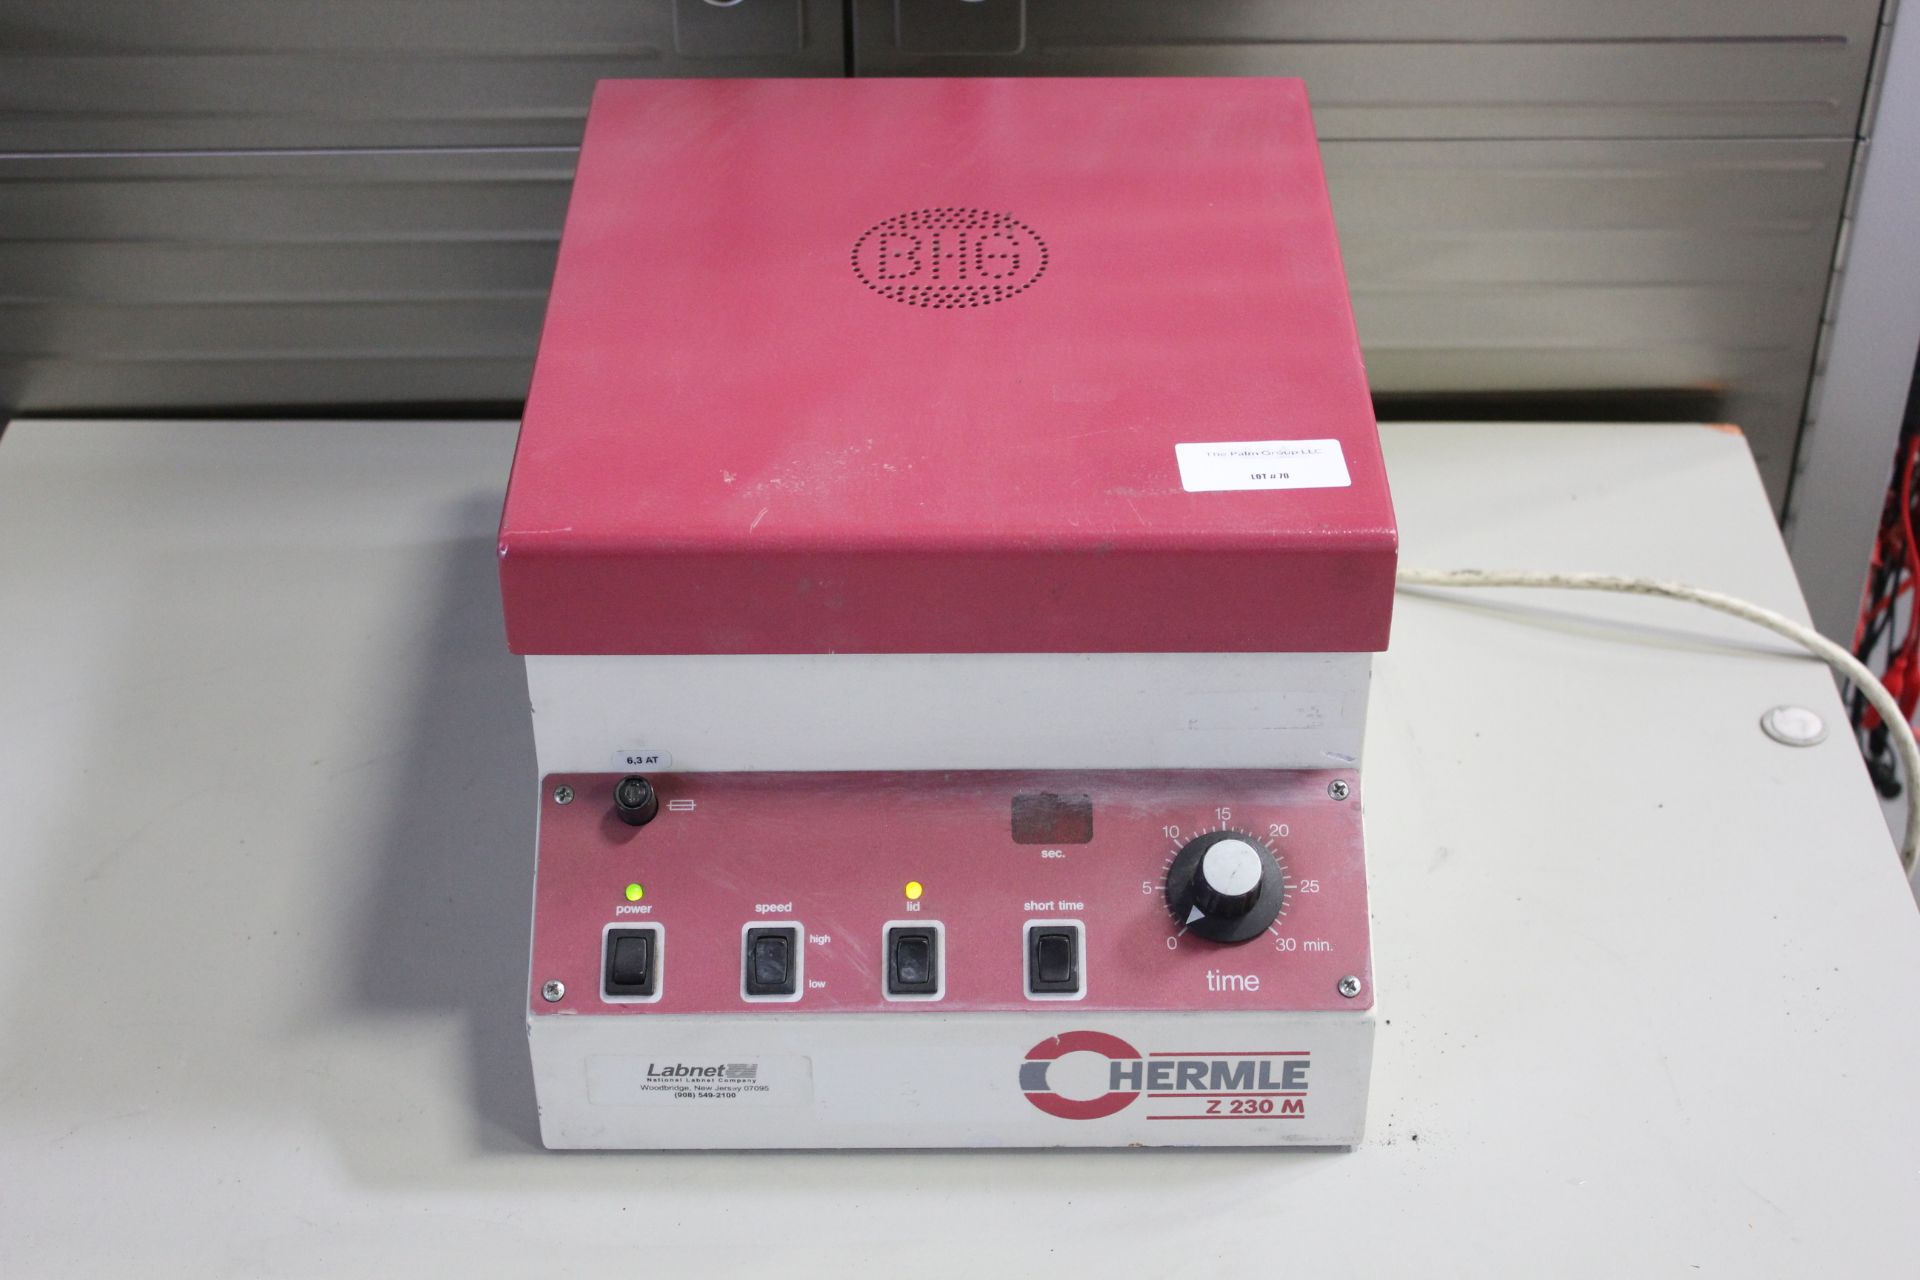 HERMLE Z 230M TABLE TOP CENTRIFUGE